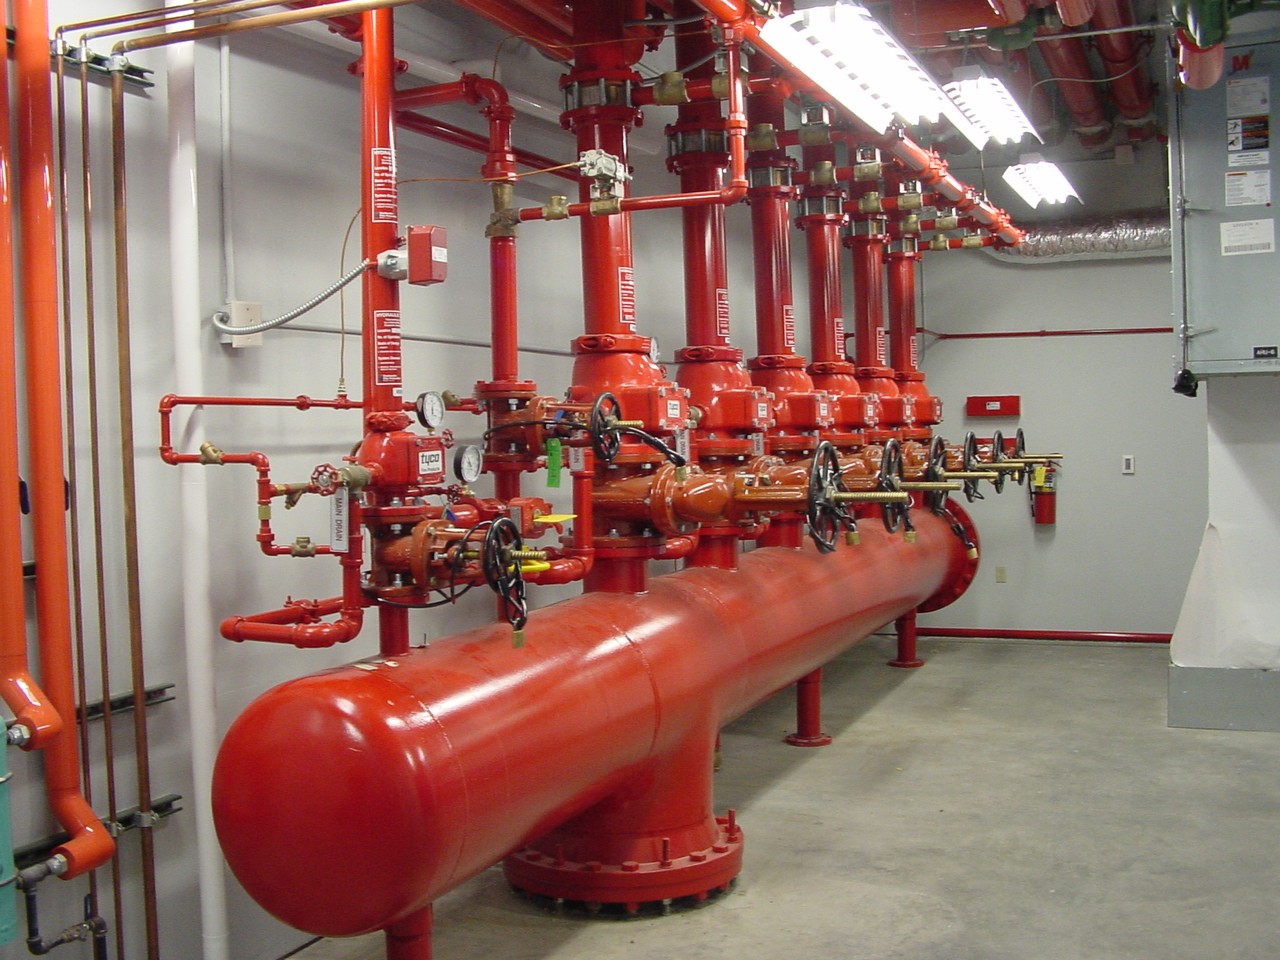 Inspection and maintenance of Fire Protection Systems